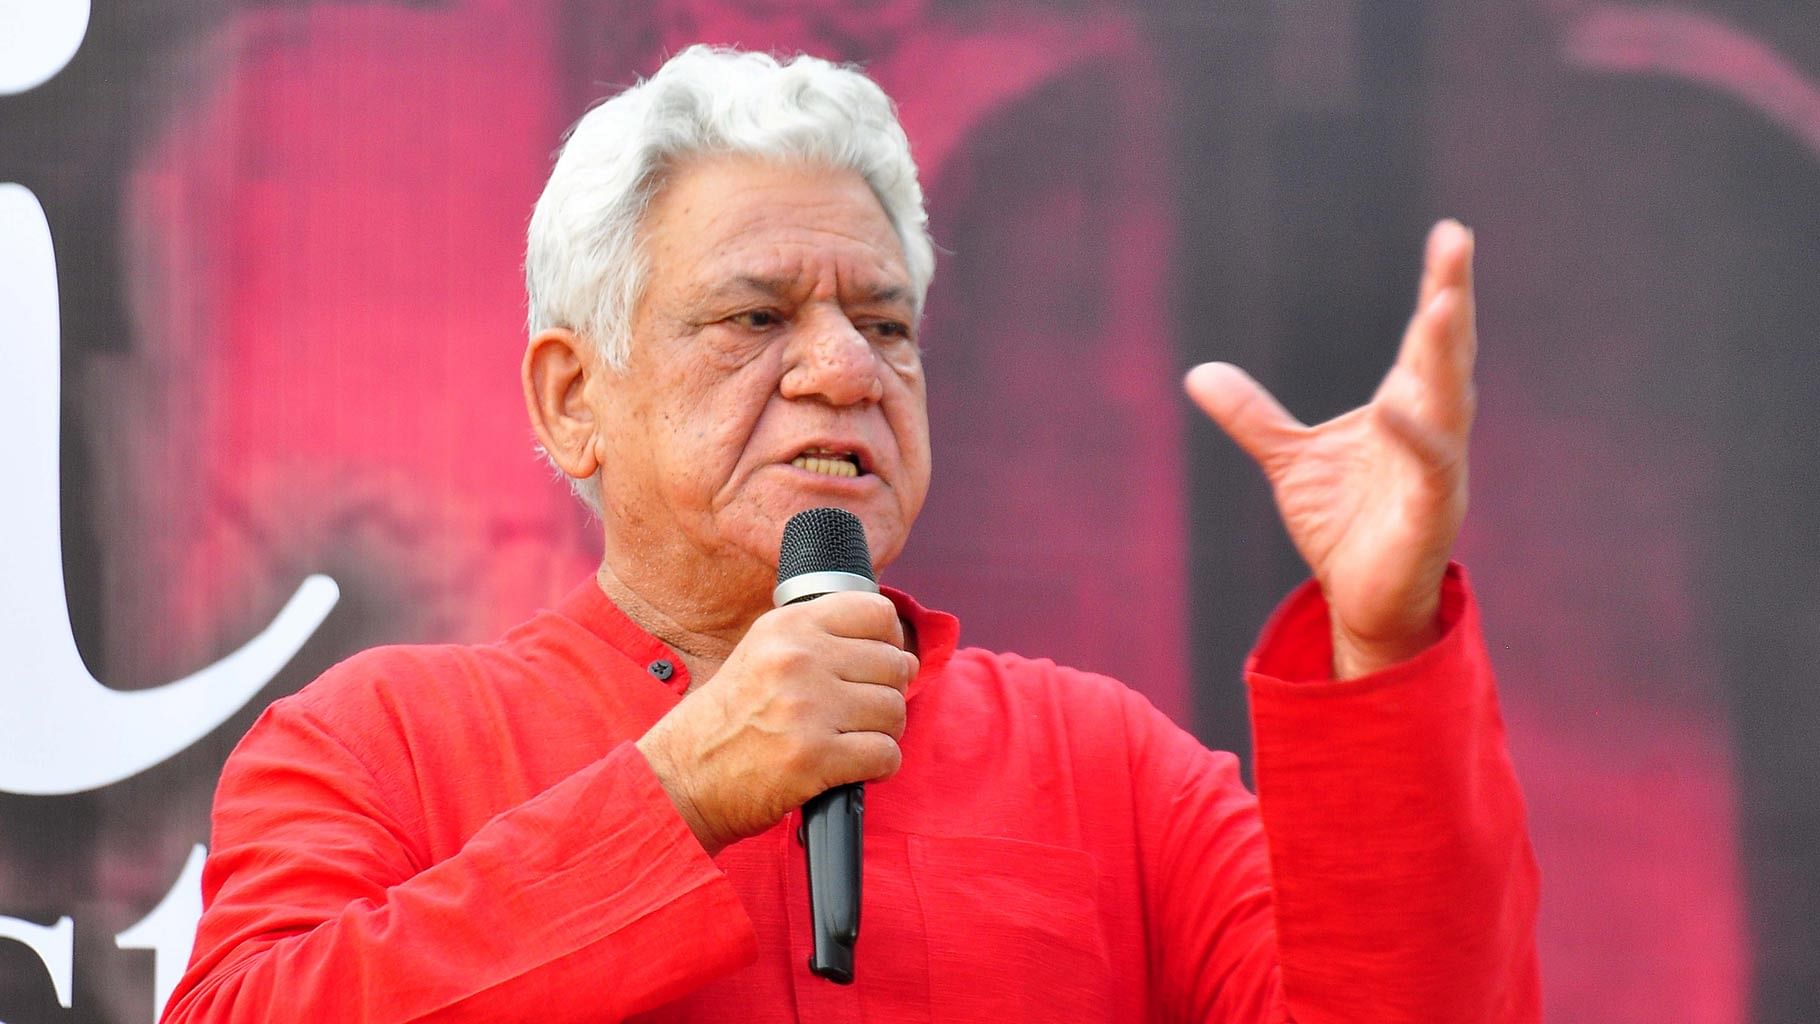 Om Puri remains one of the best and most prolific actors of the Indian film industry.&nbsp;